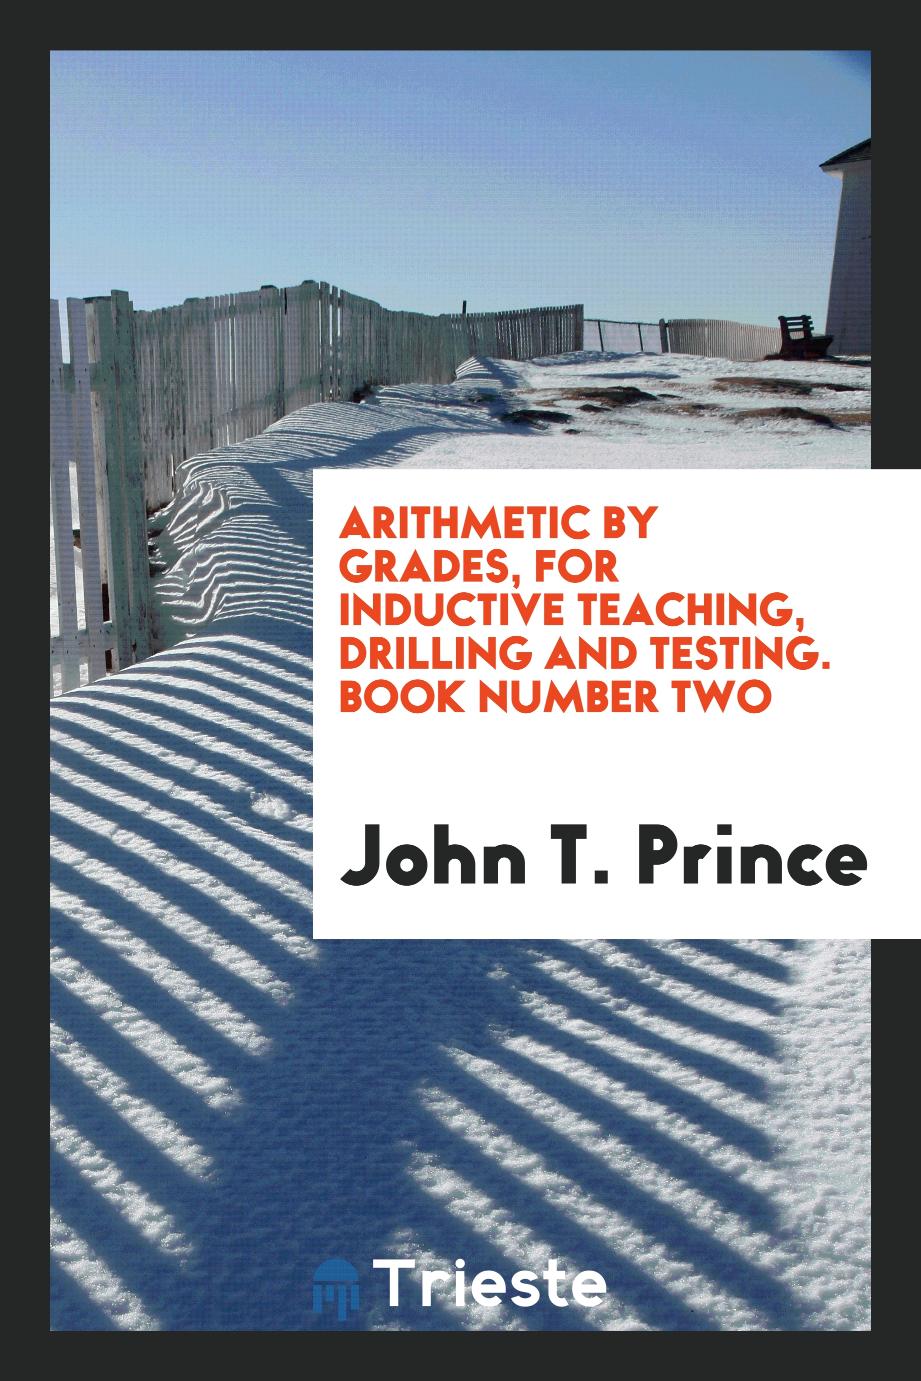 Arithmetic by Grades, for Inductive Teaching, Drilling and Testing. Book Number Two